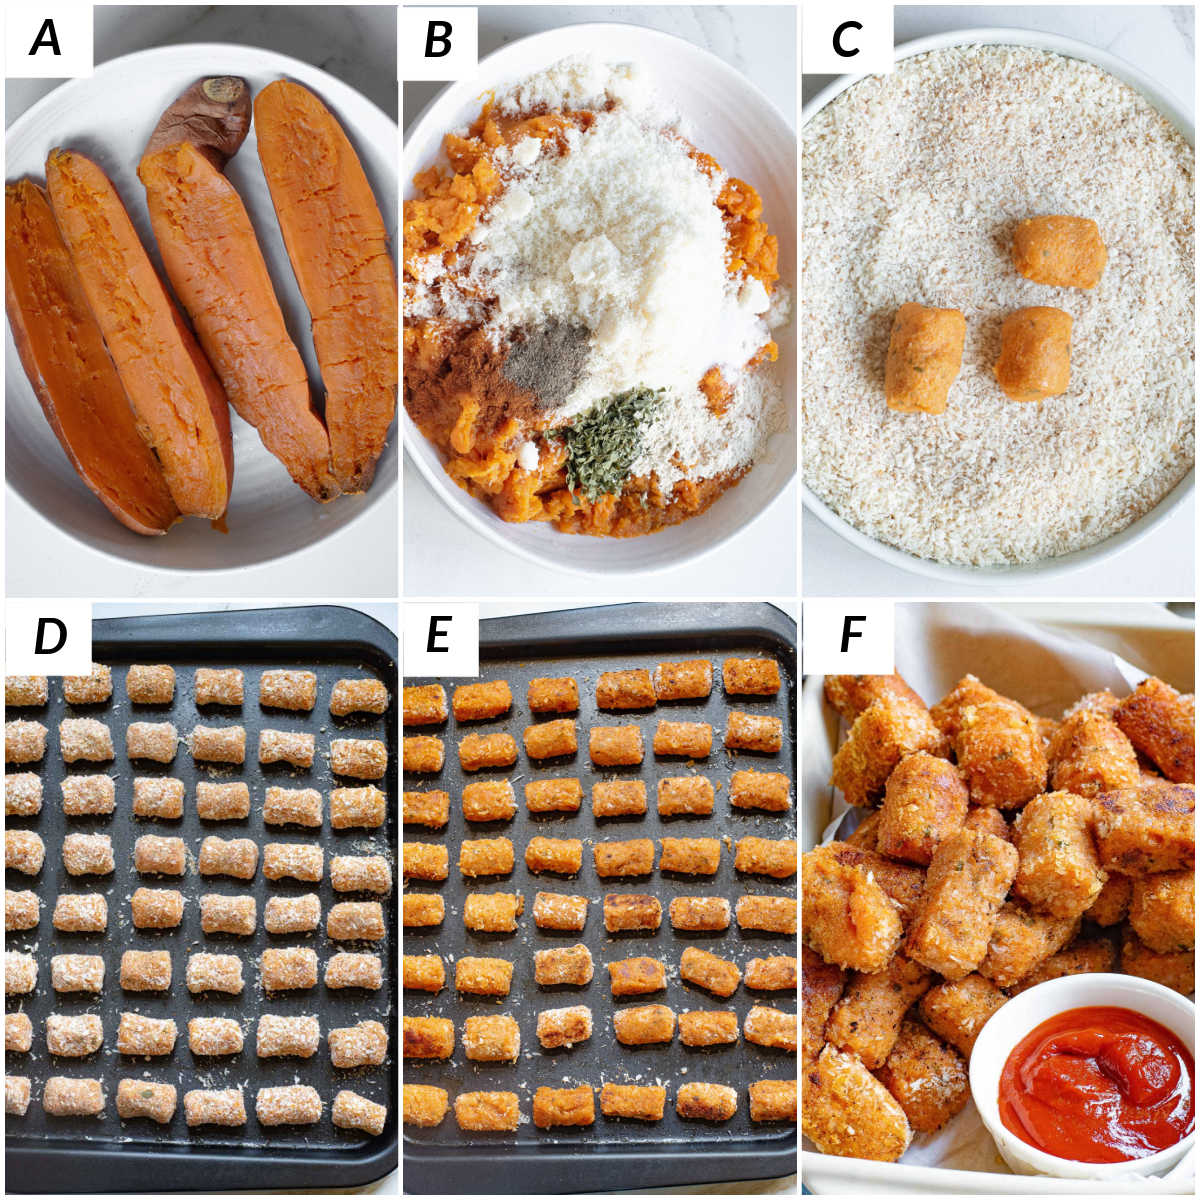 image collage showing the steps for making this sweet potato tater tots recipe